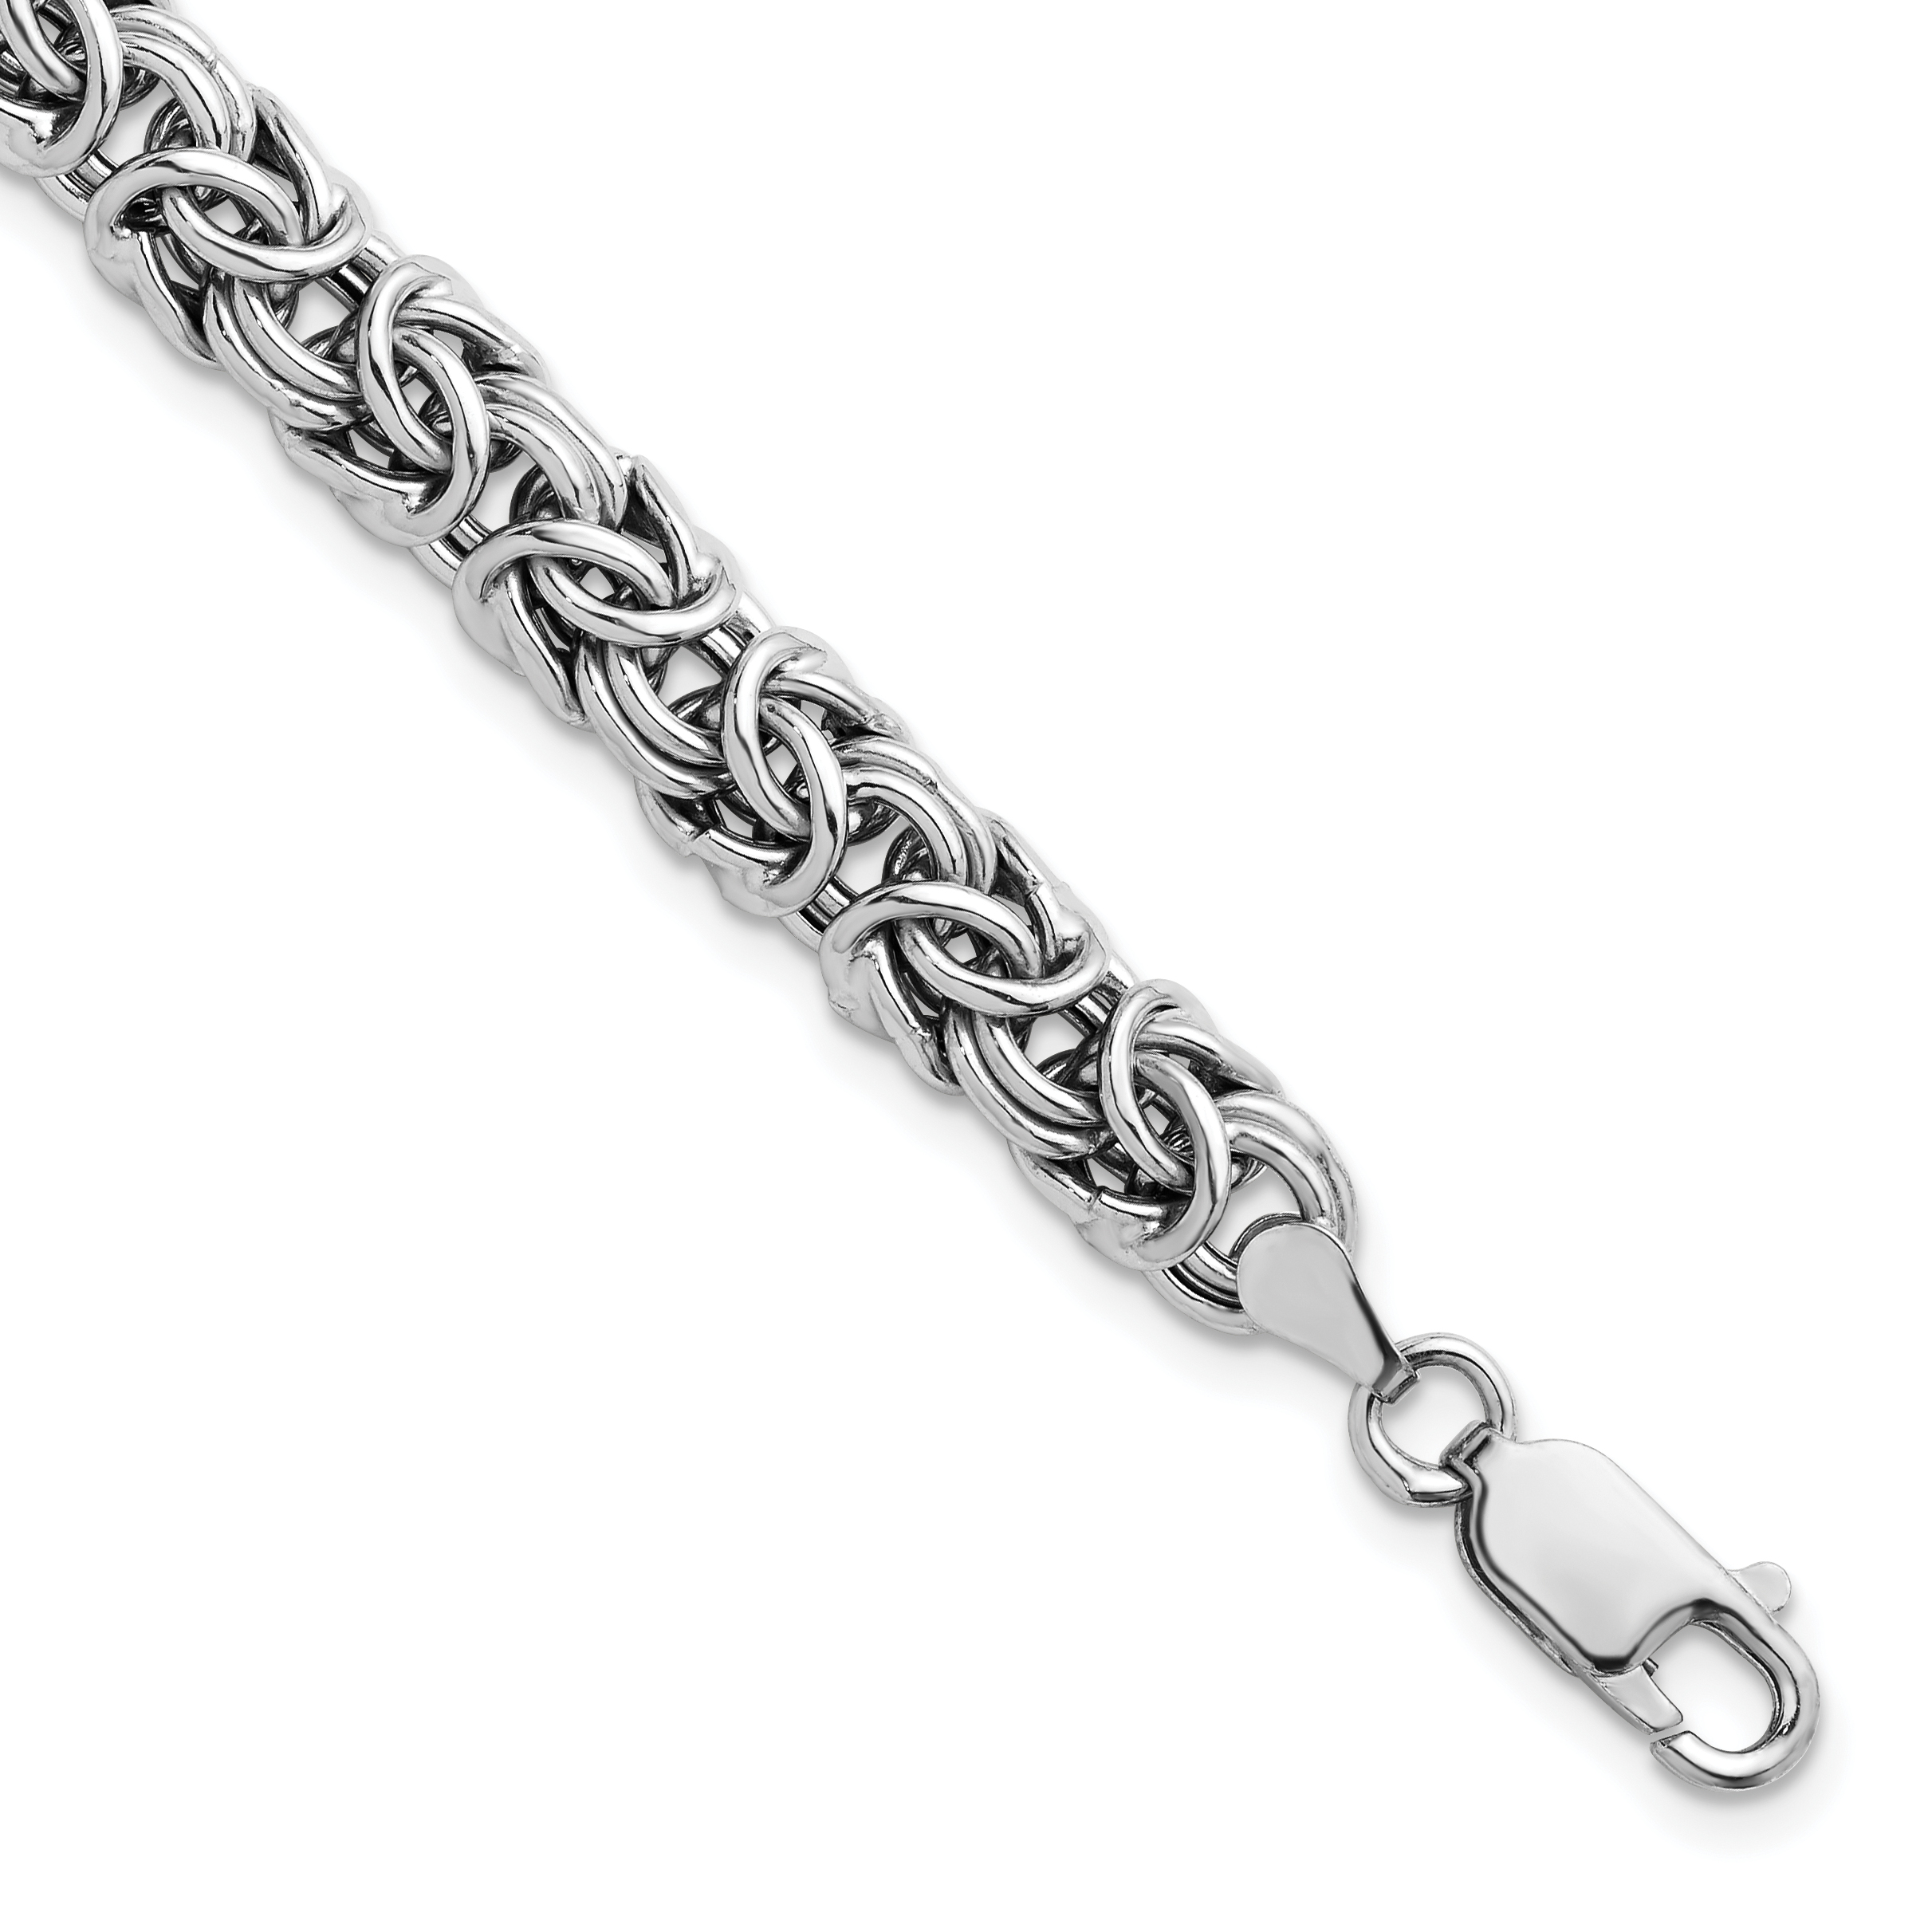 Unisex 7.5 mm Wide Solid Sterling Silver Round Square Link Chain Bracelet,Square  — Discovered